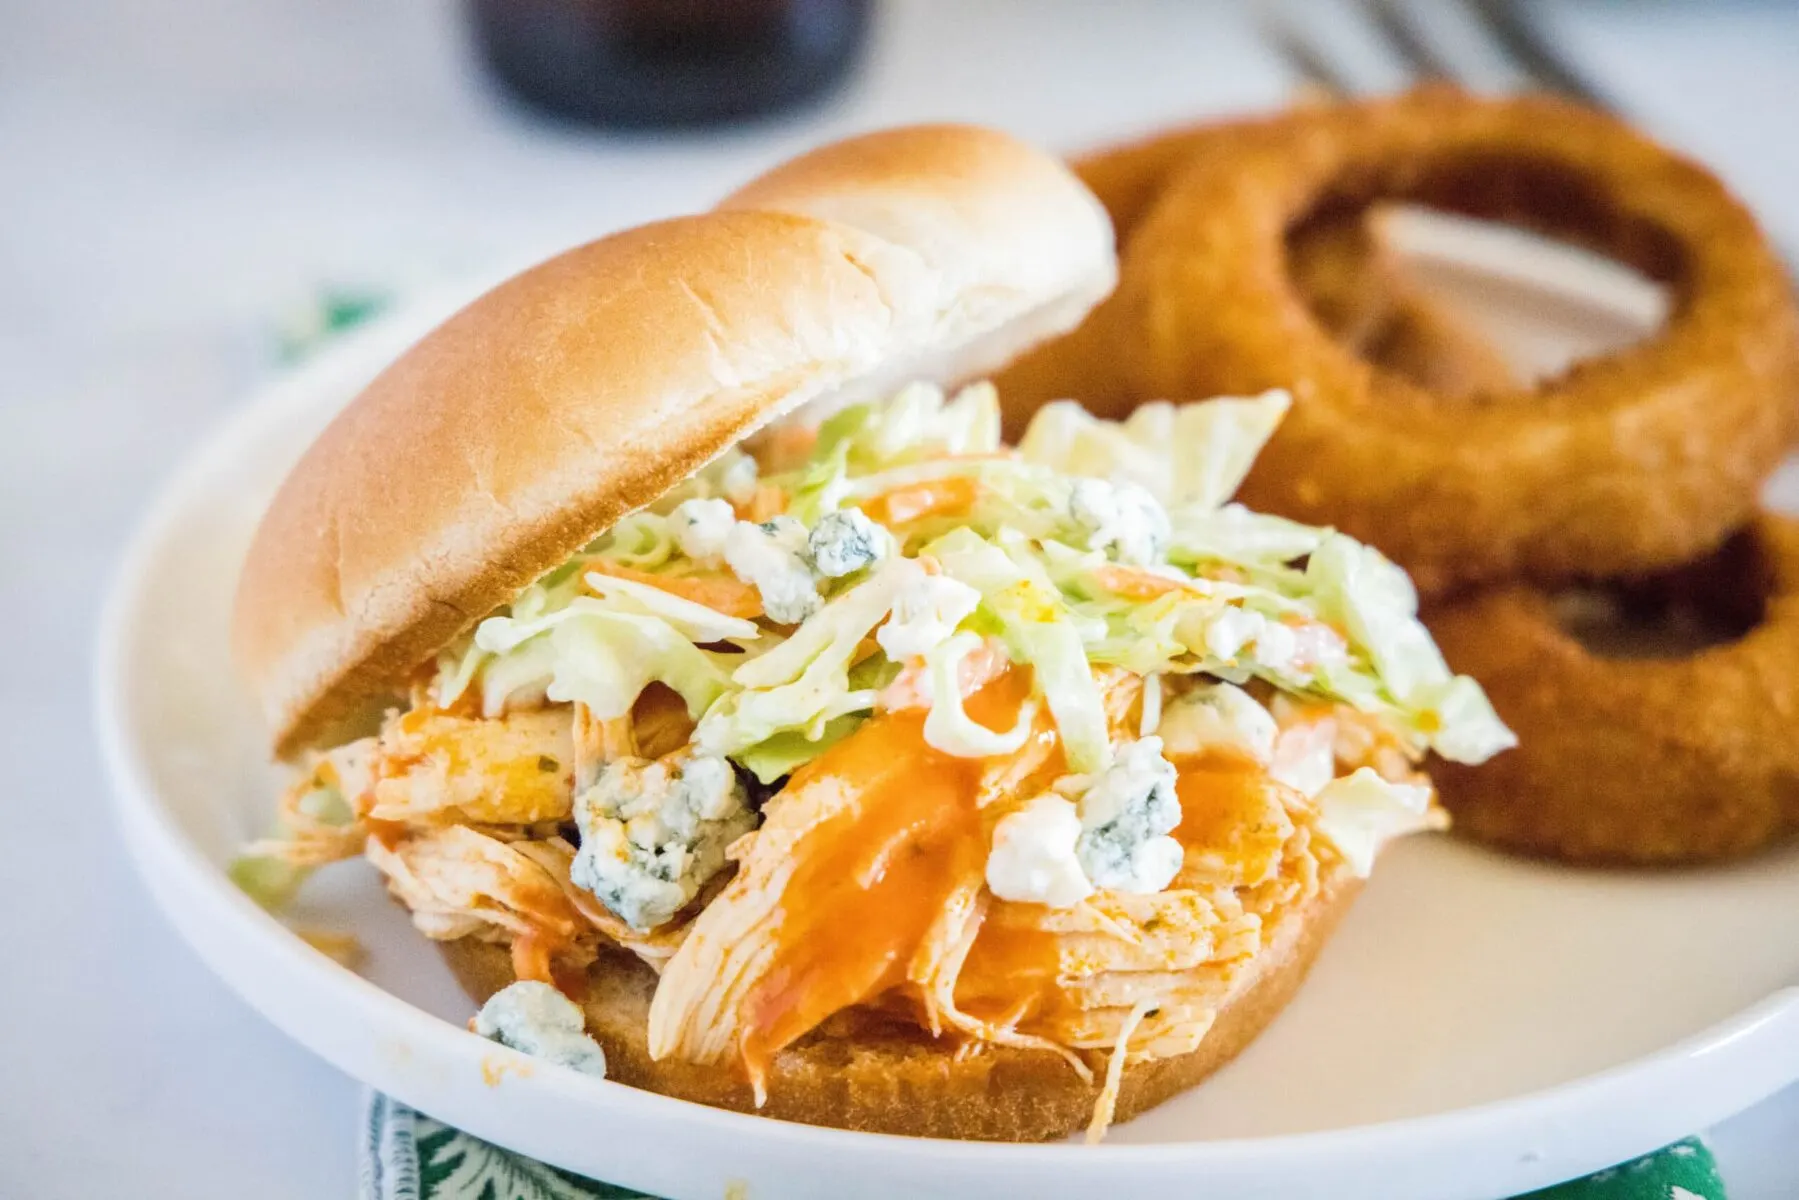 A plate with a buffalo chicken sandwich and onion rings on it